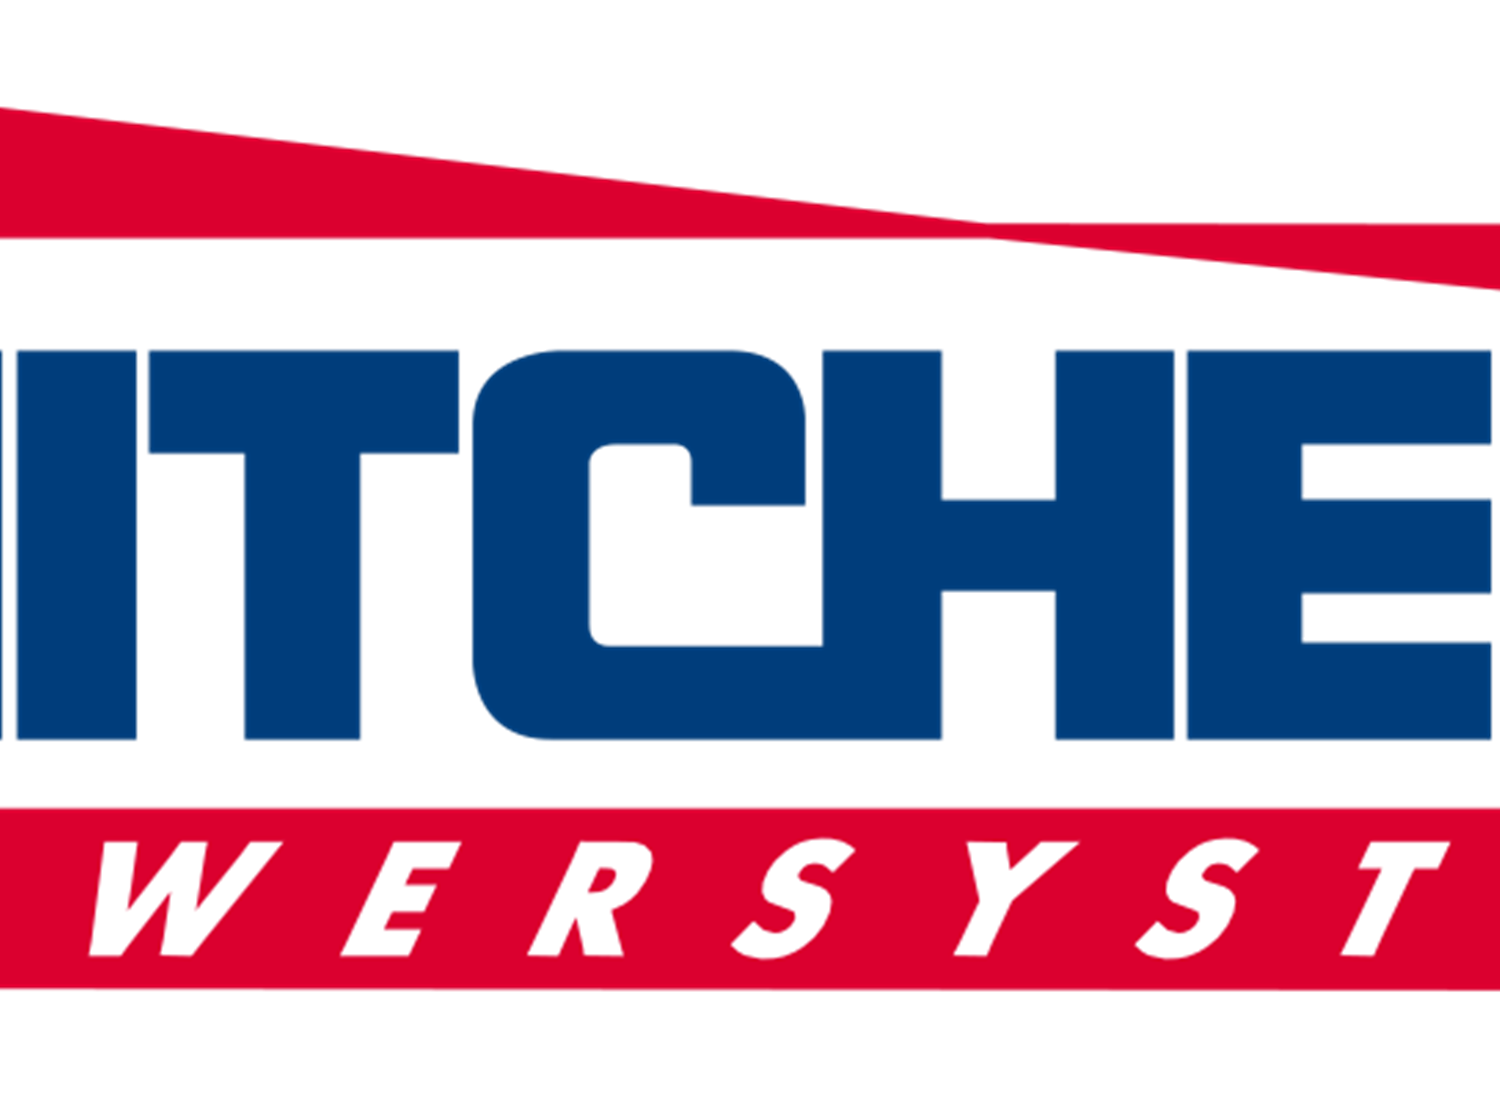 Mitchel Powersystems logo in colour